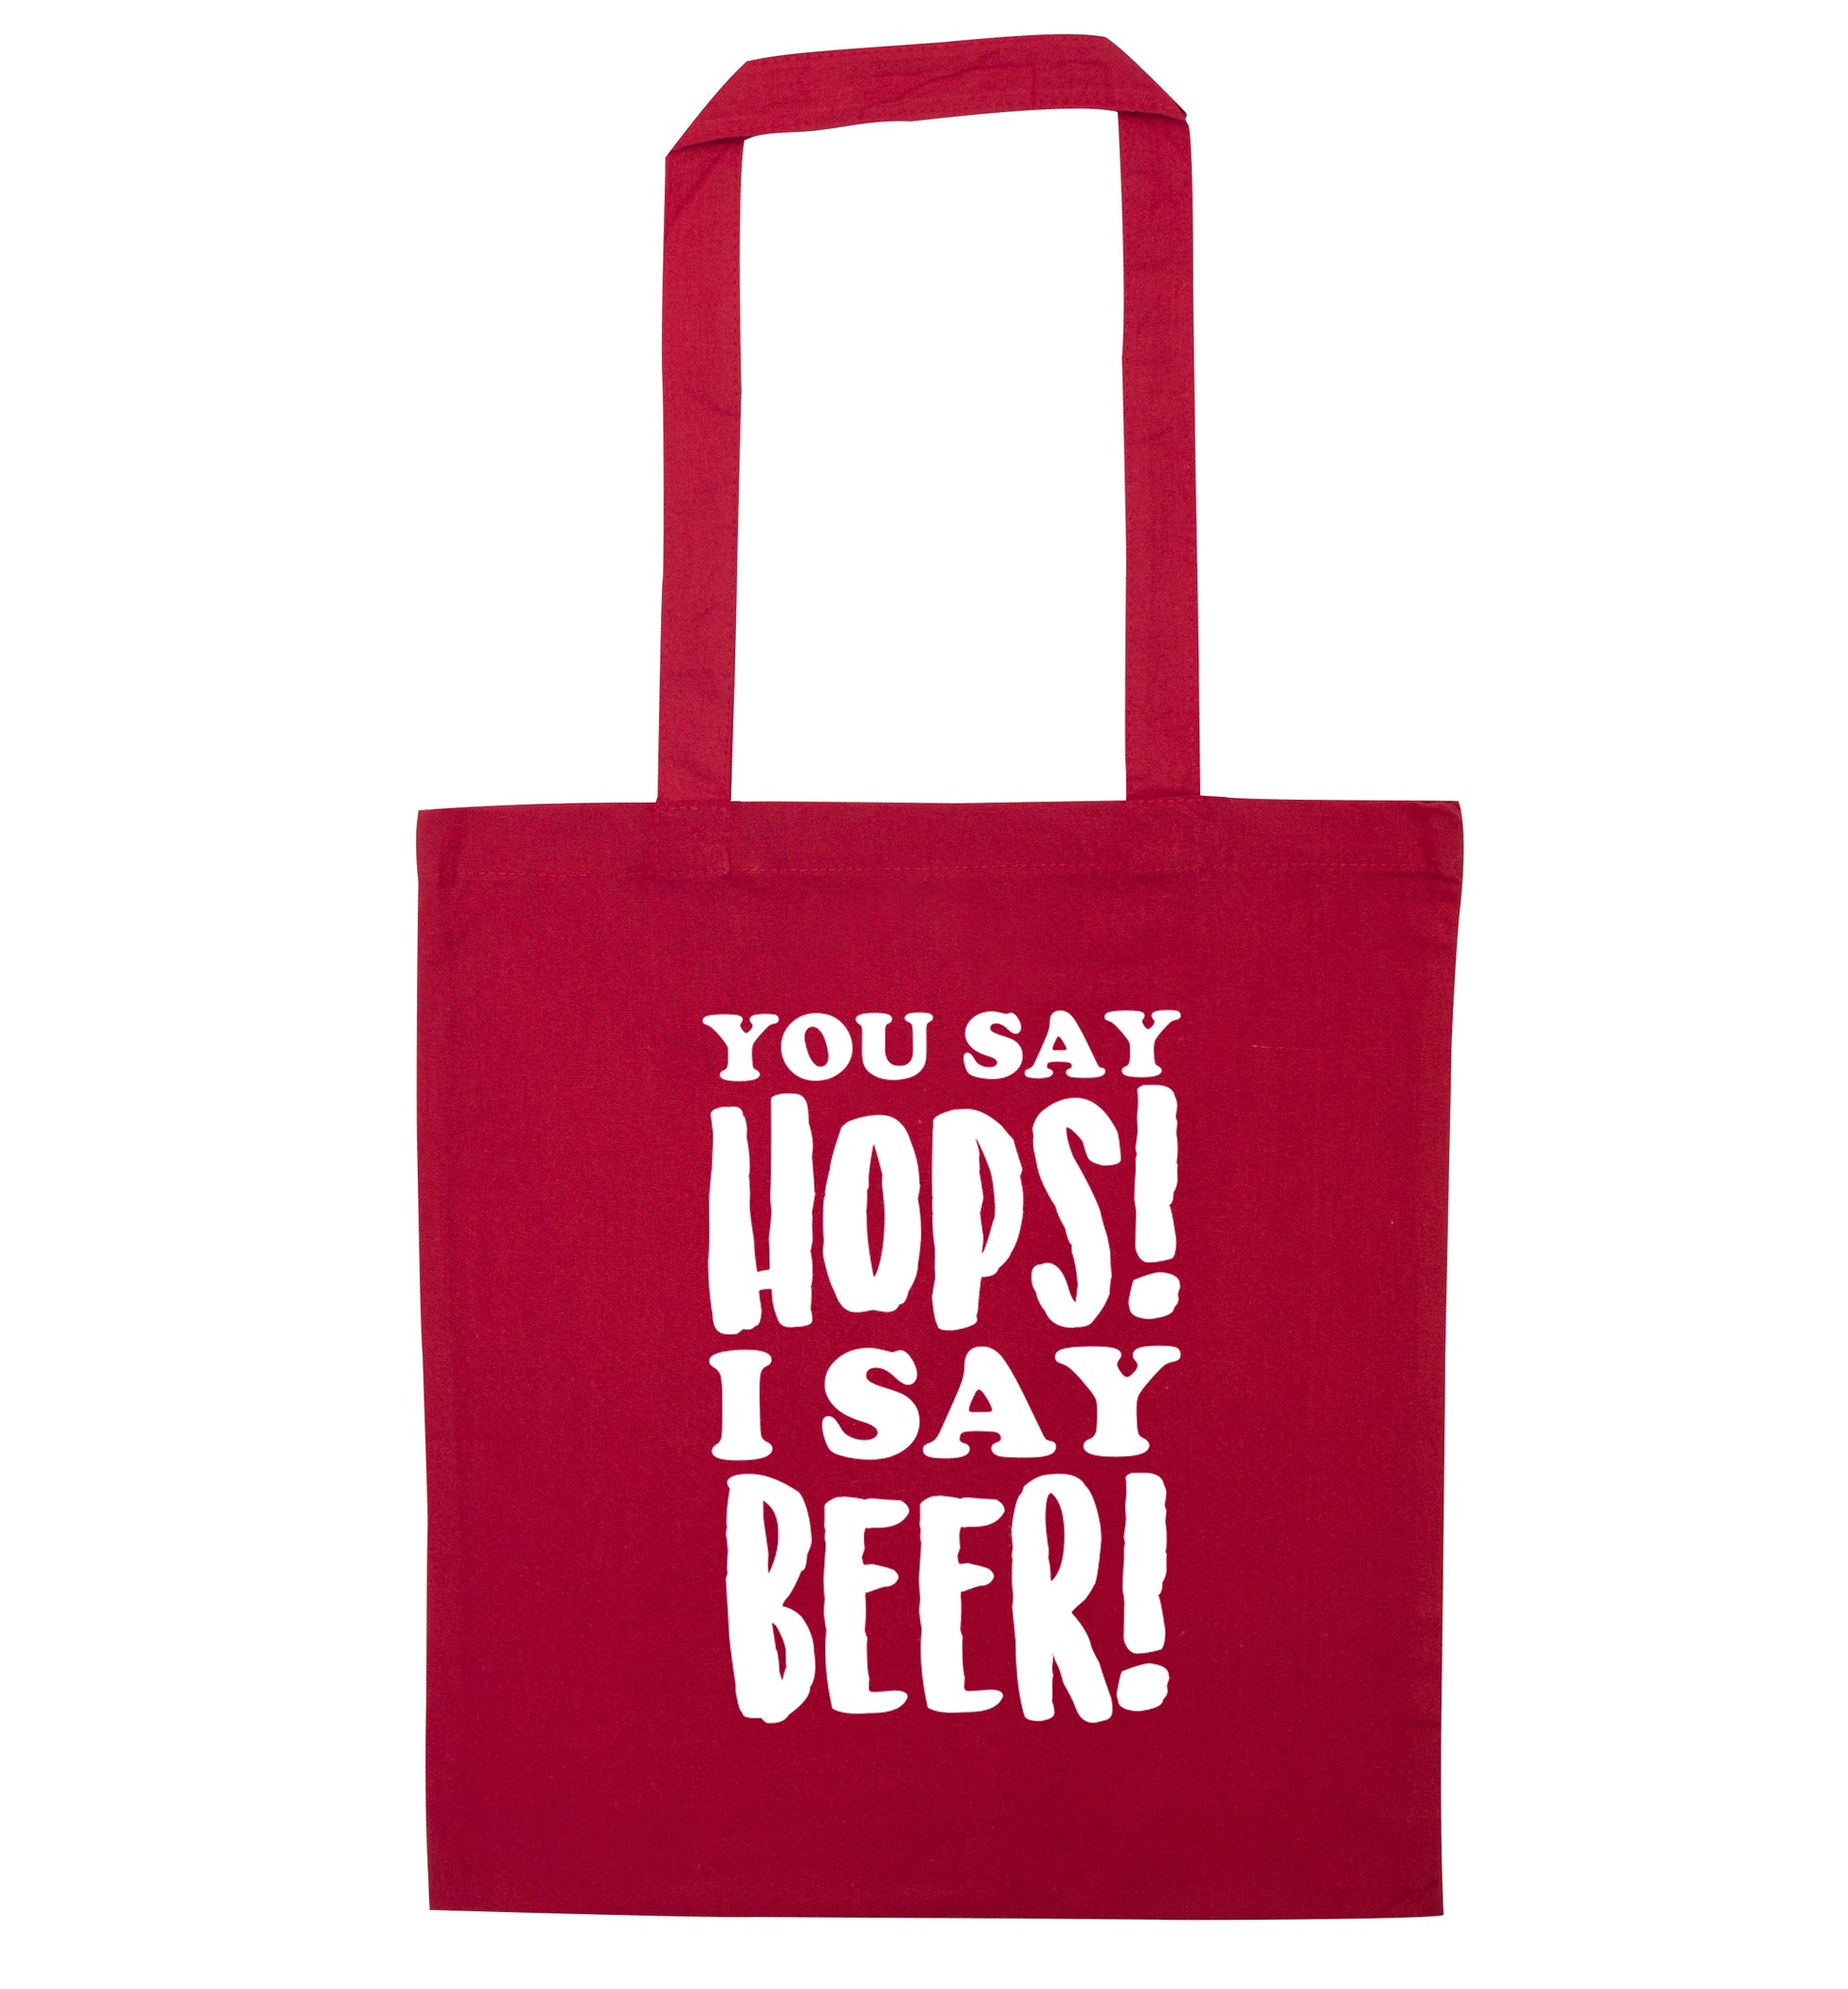 You say hops I say beer! red tote bag